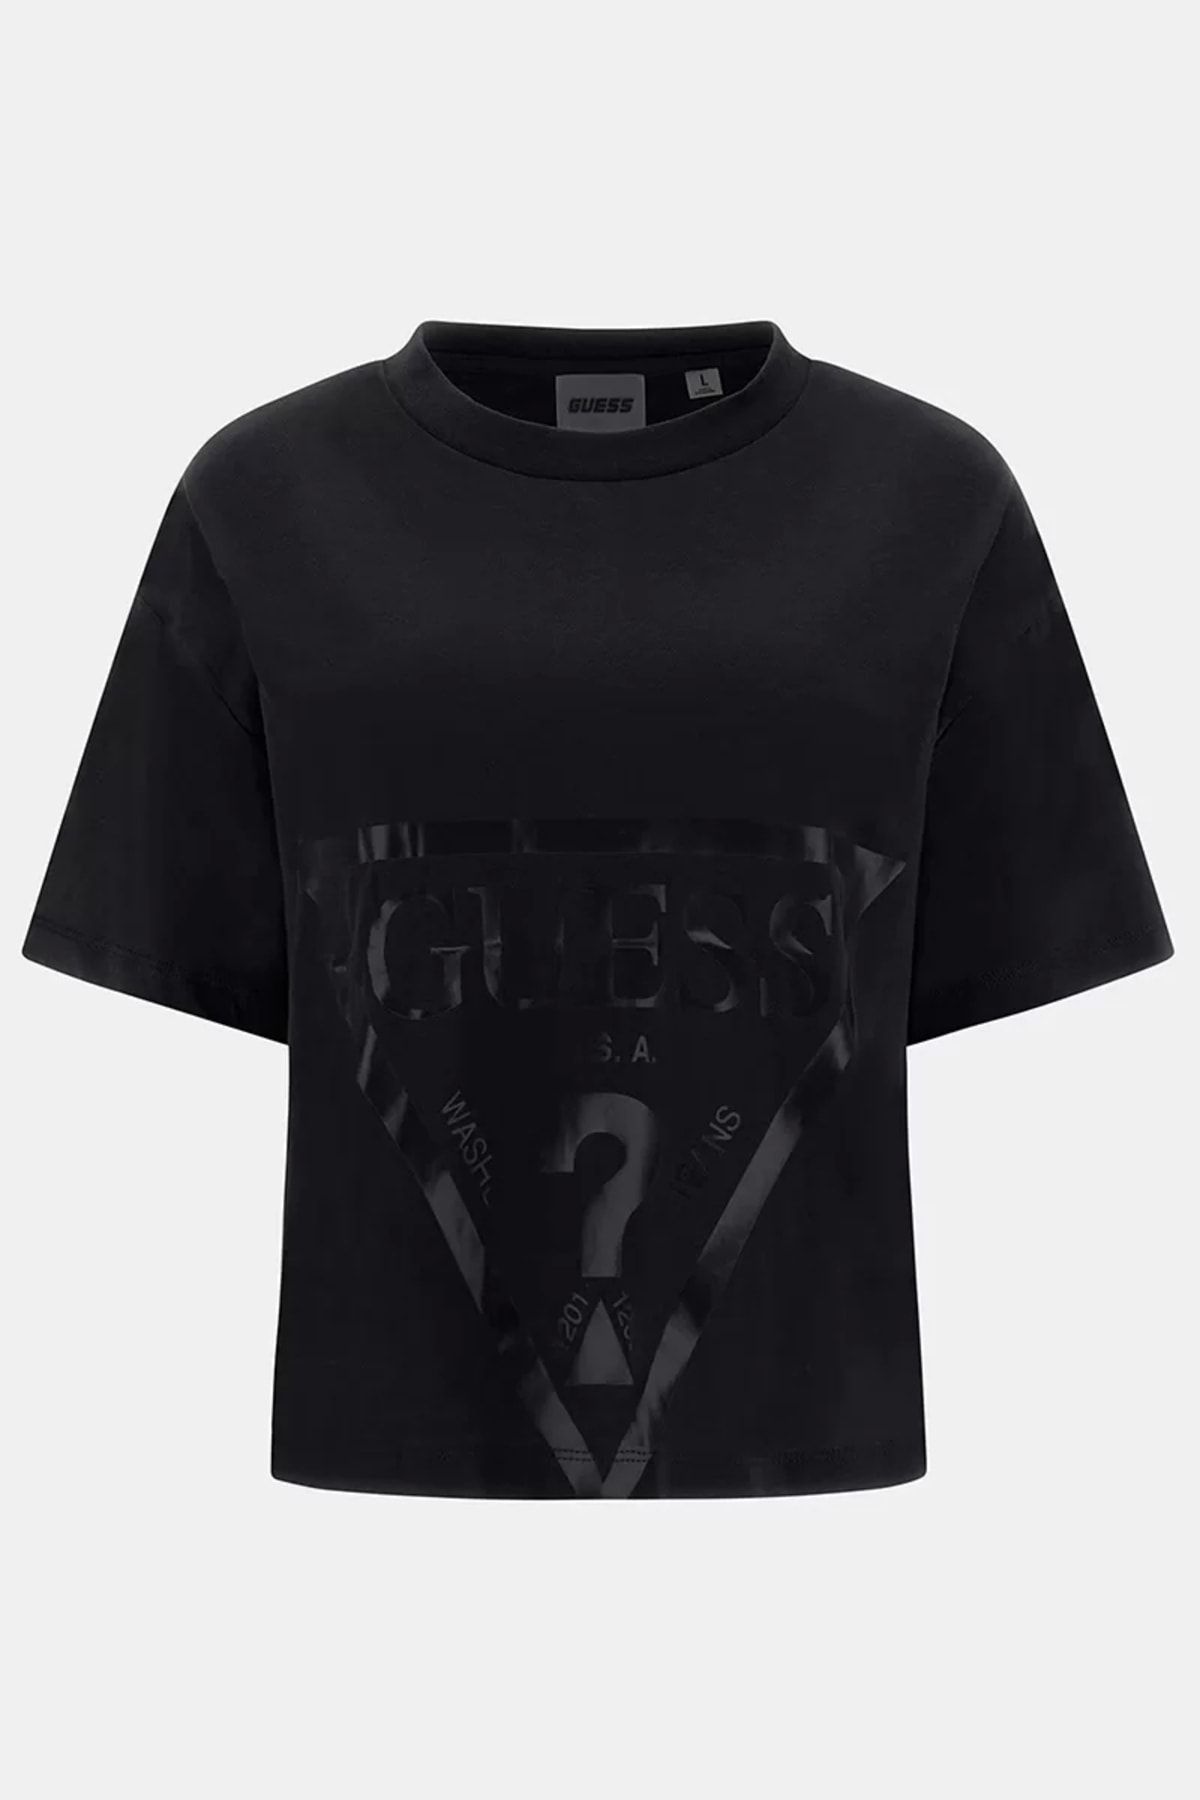 Guess Guess ADELE SS TEE Ld32